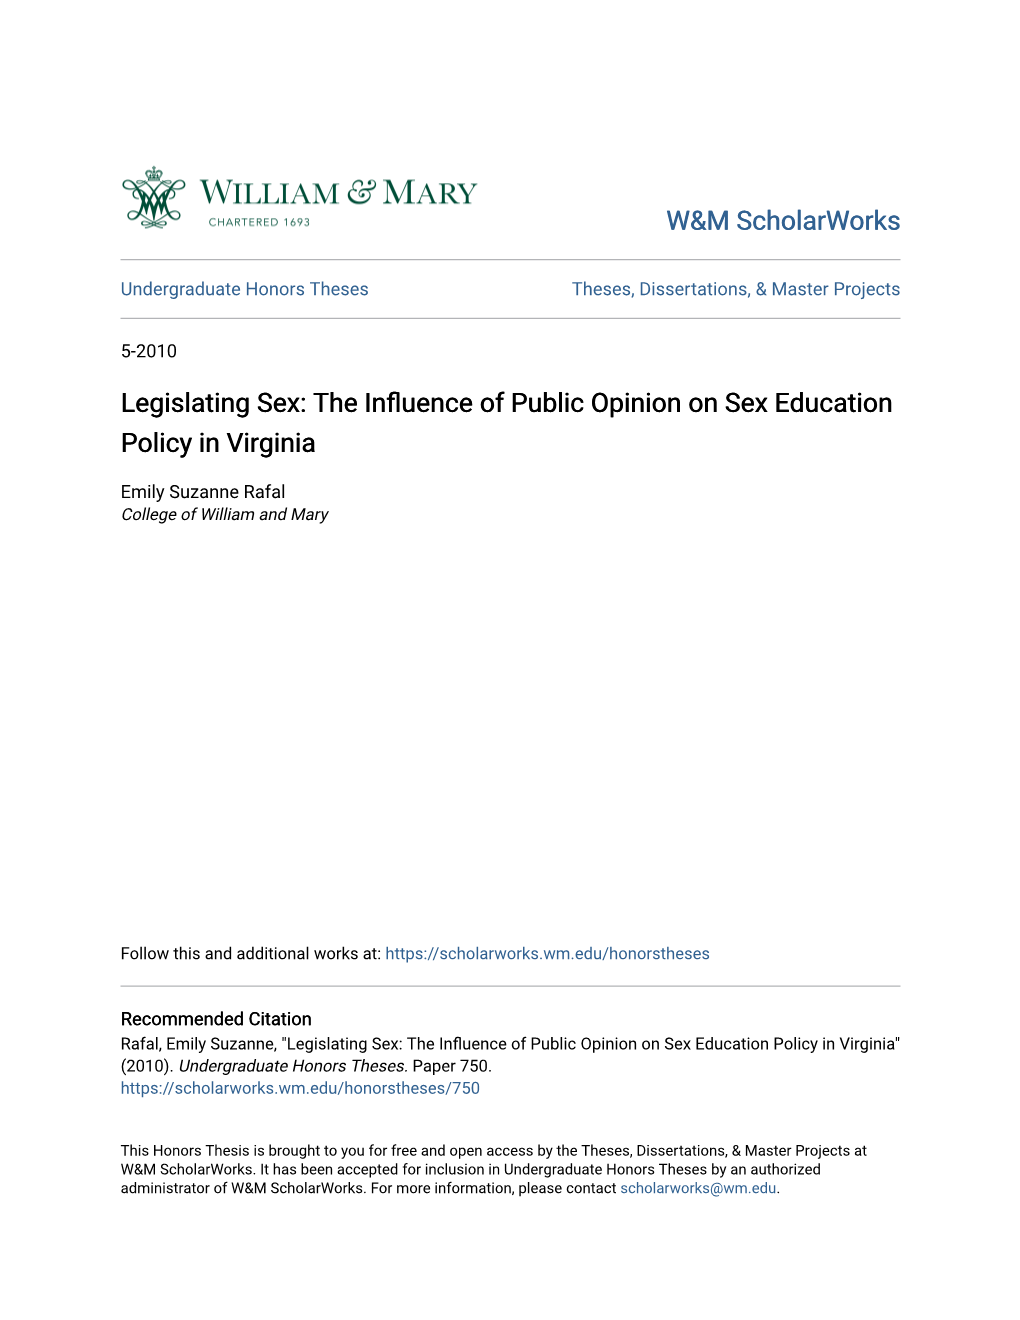 The Influence of Public Opinion on Sex Education Policy in Virginia